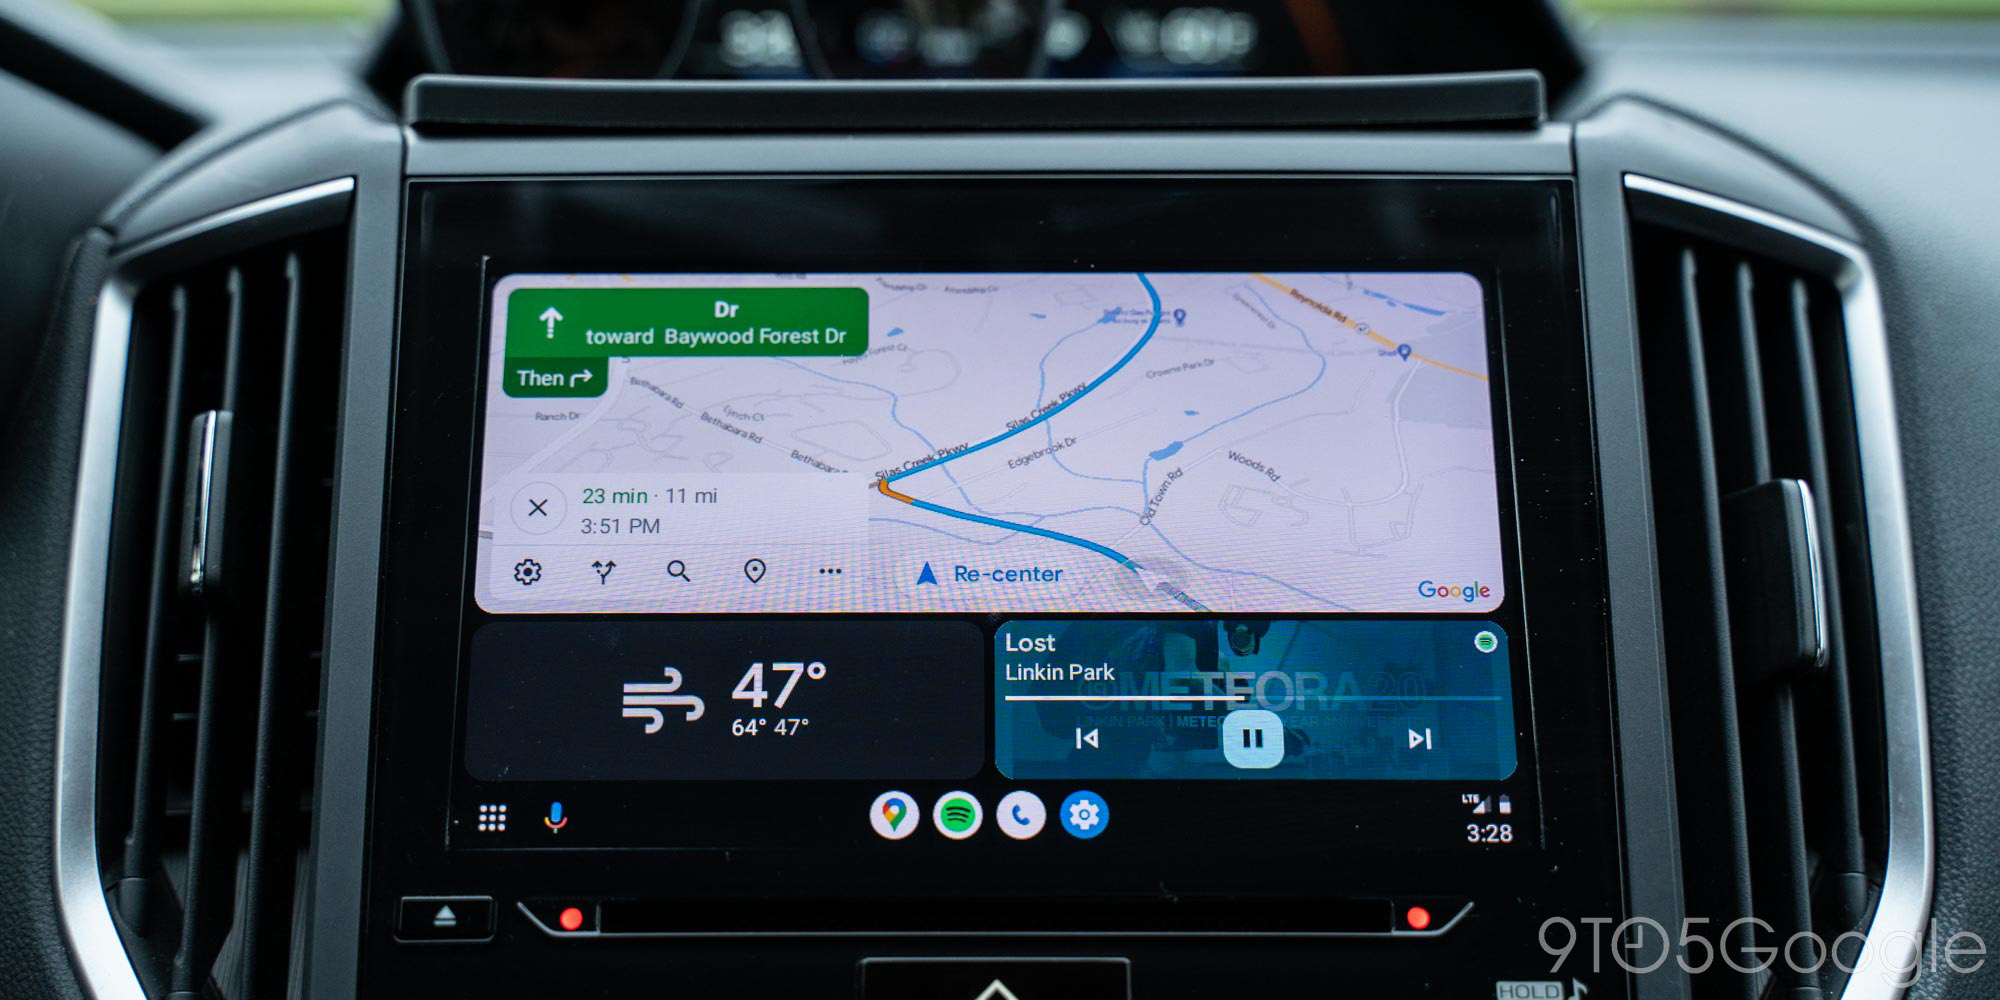 Android Auto widgets: How to get the most of out them